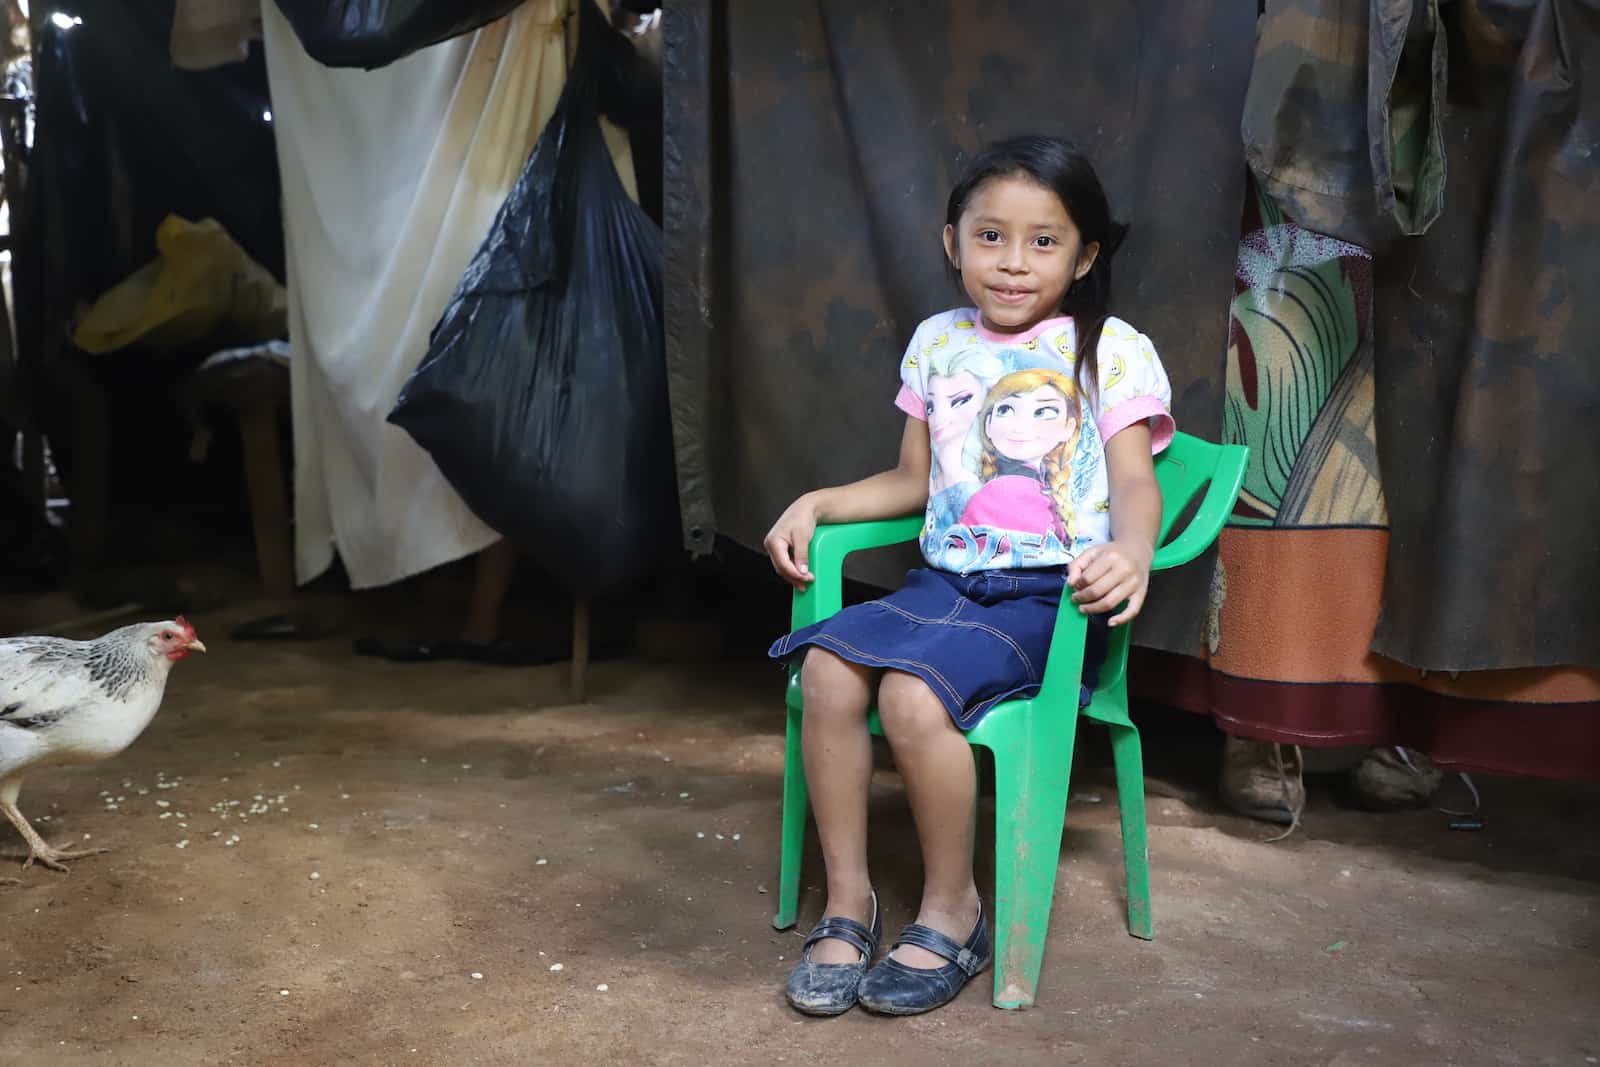 A girl in an "Anna and Elsa" shirt and jean skirt sits in a green plastic chair inside her home in Central America. There are large plastic tarps hanging from the ceiling to serve as walls. A chicken eats corn on the floor. 